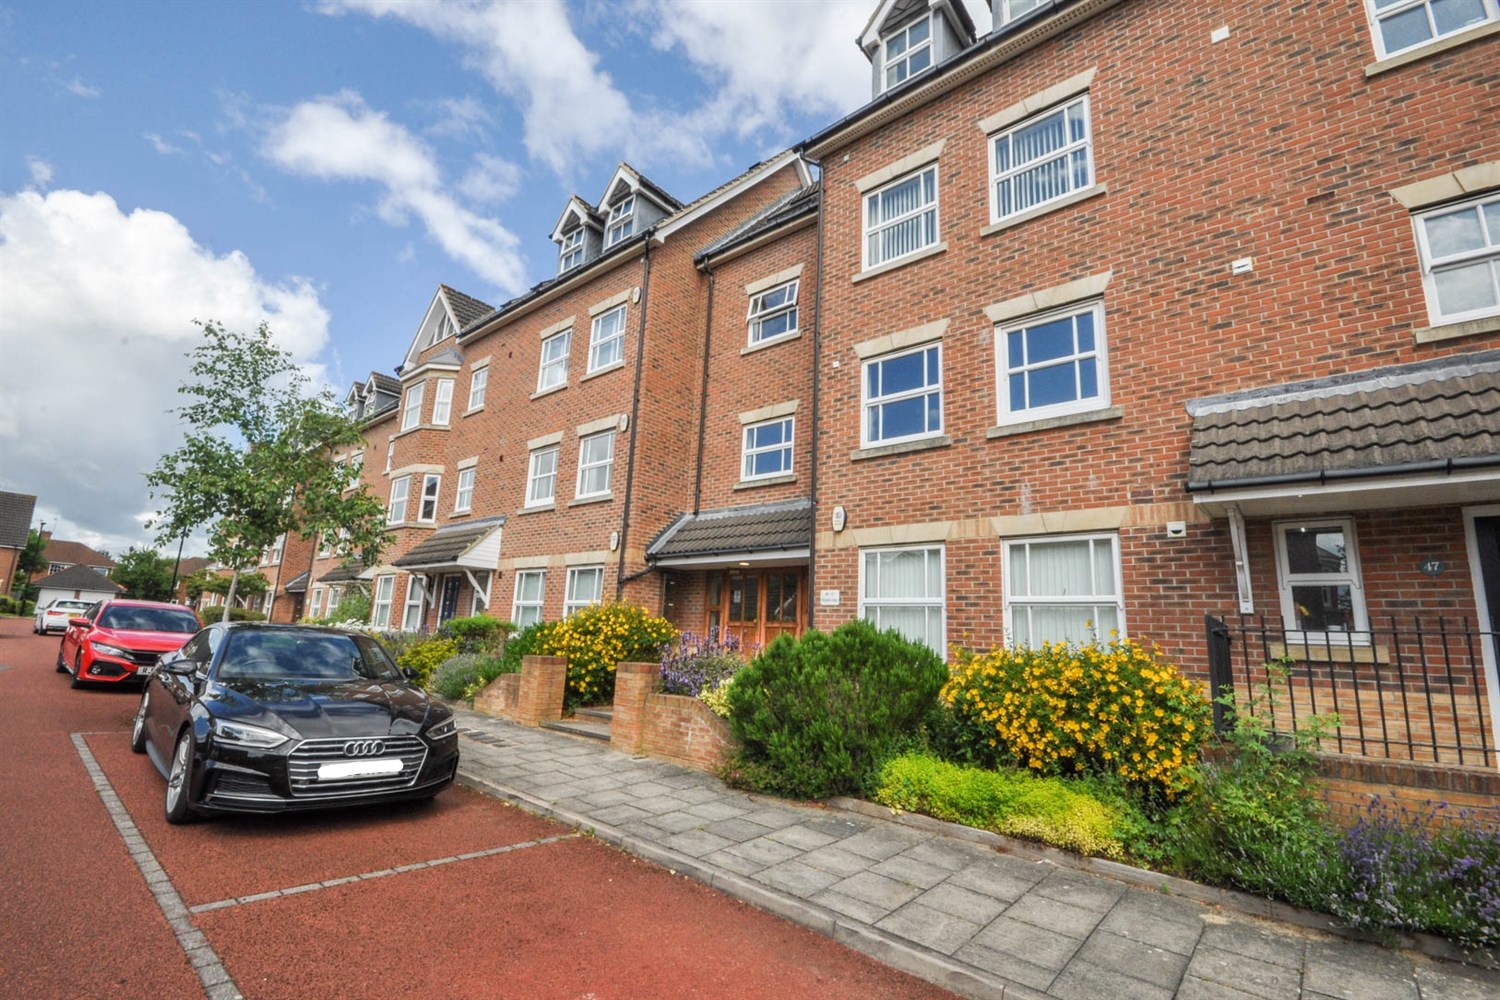 2 bed apartment for sale in Highbridge, Gosforth - Property Image 1